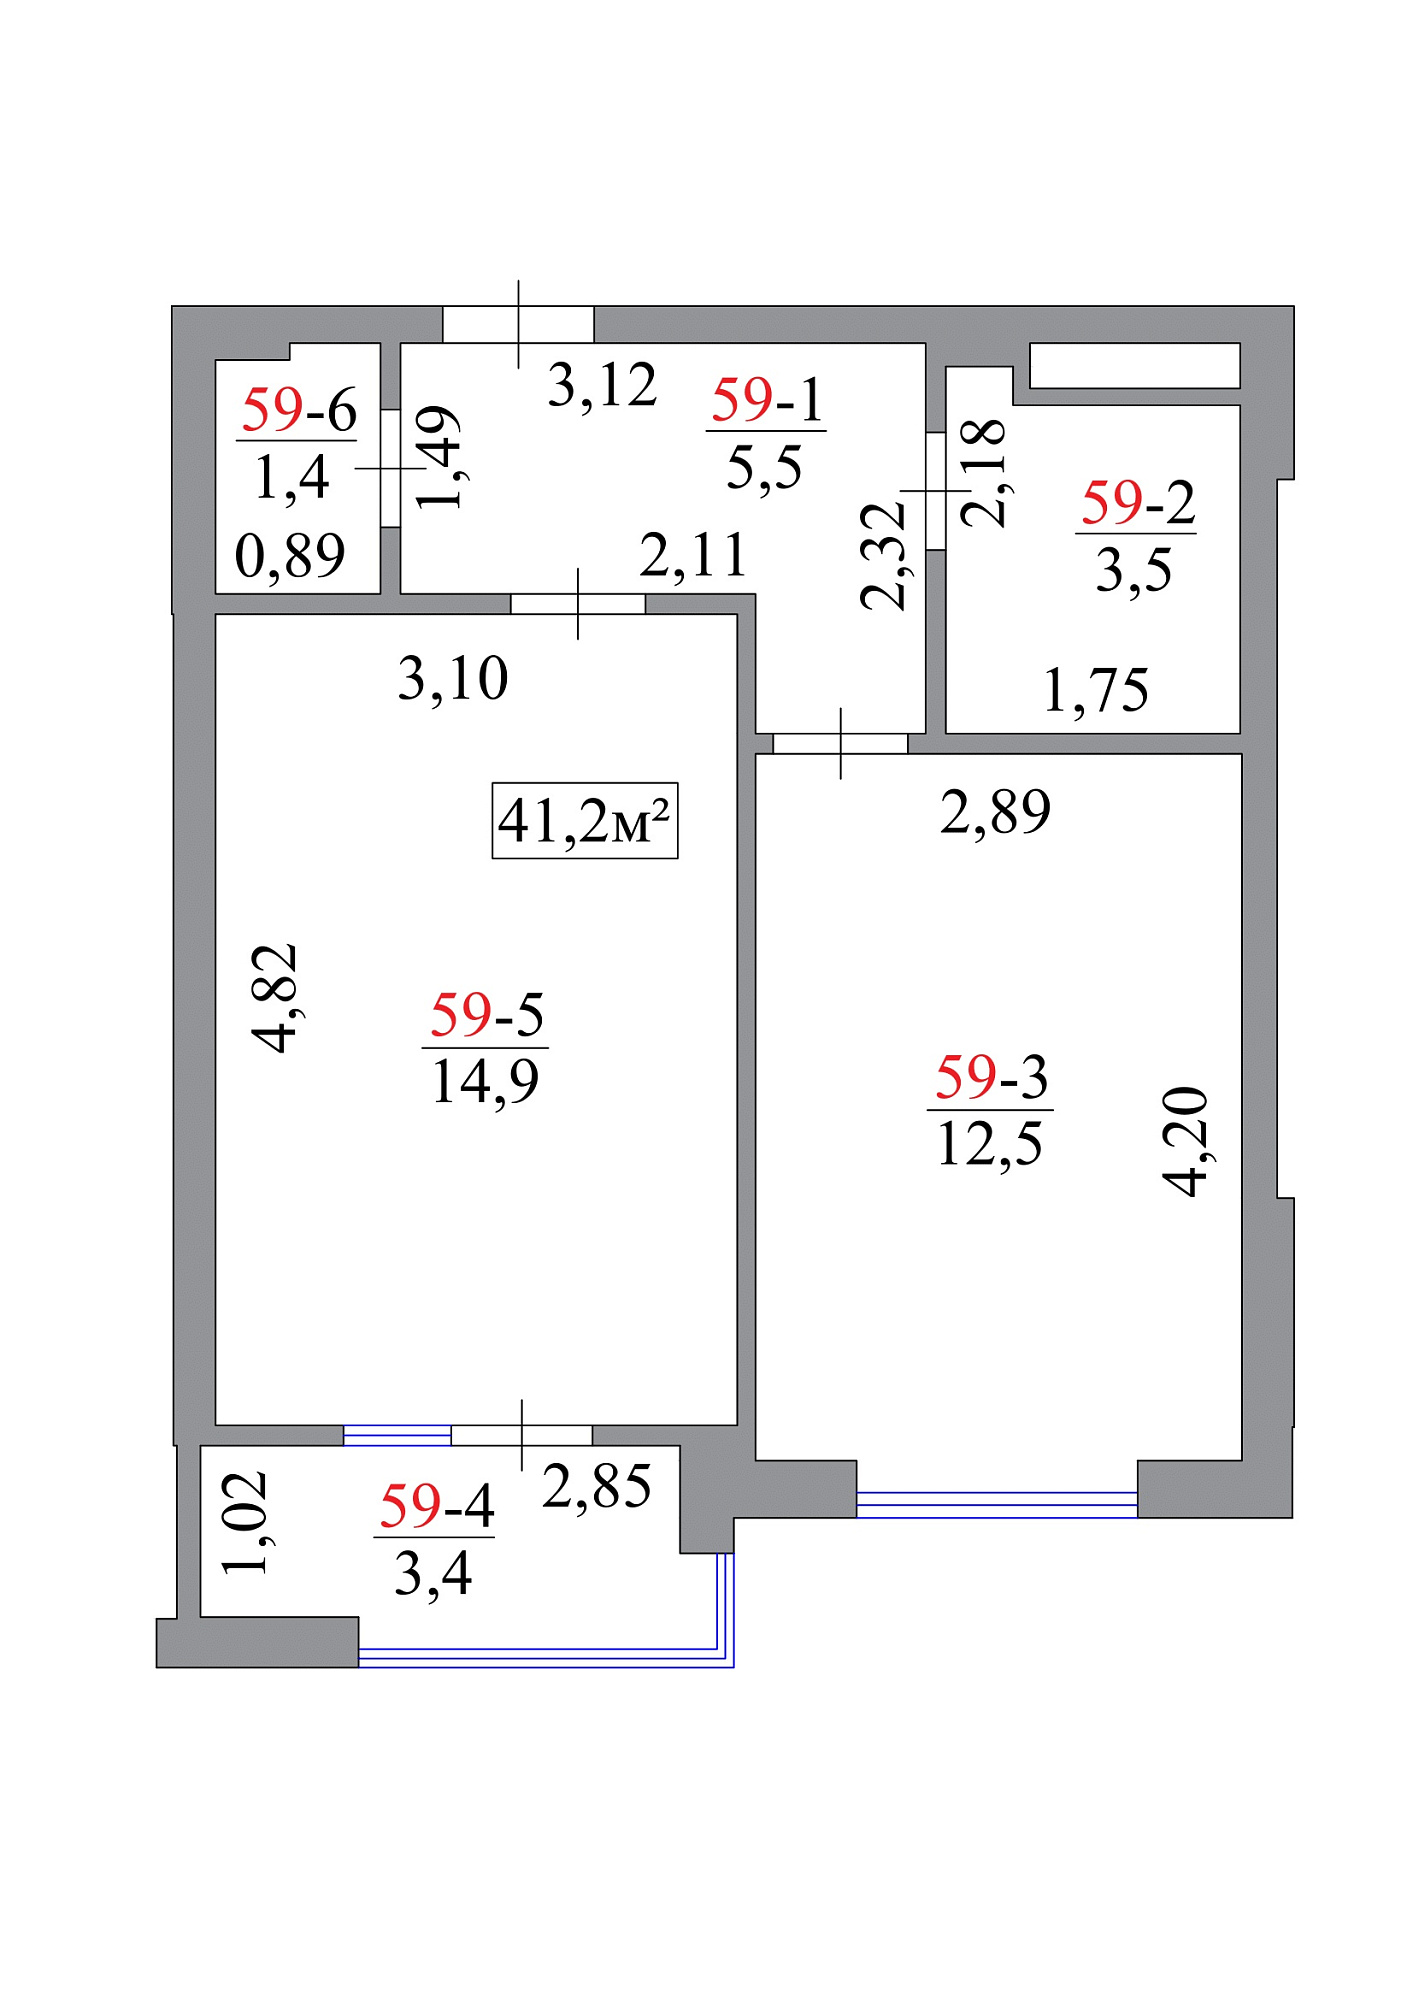 Planning 1-rm flats area 41.2m2, AB-07-06/00053.